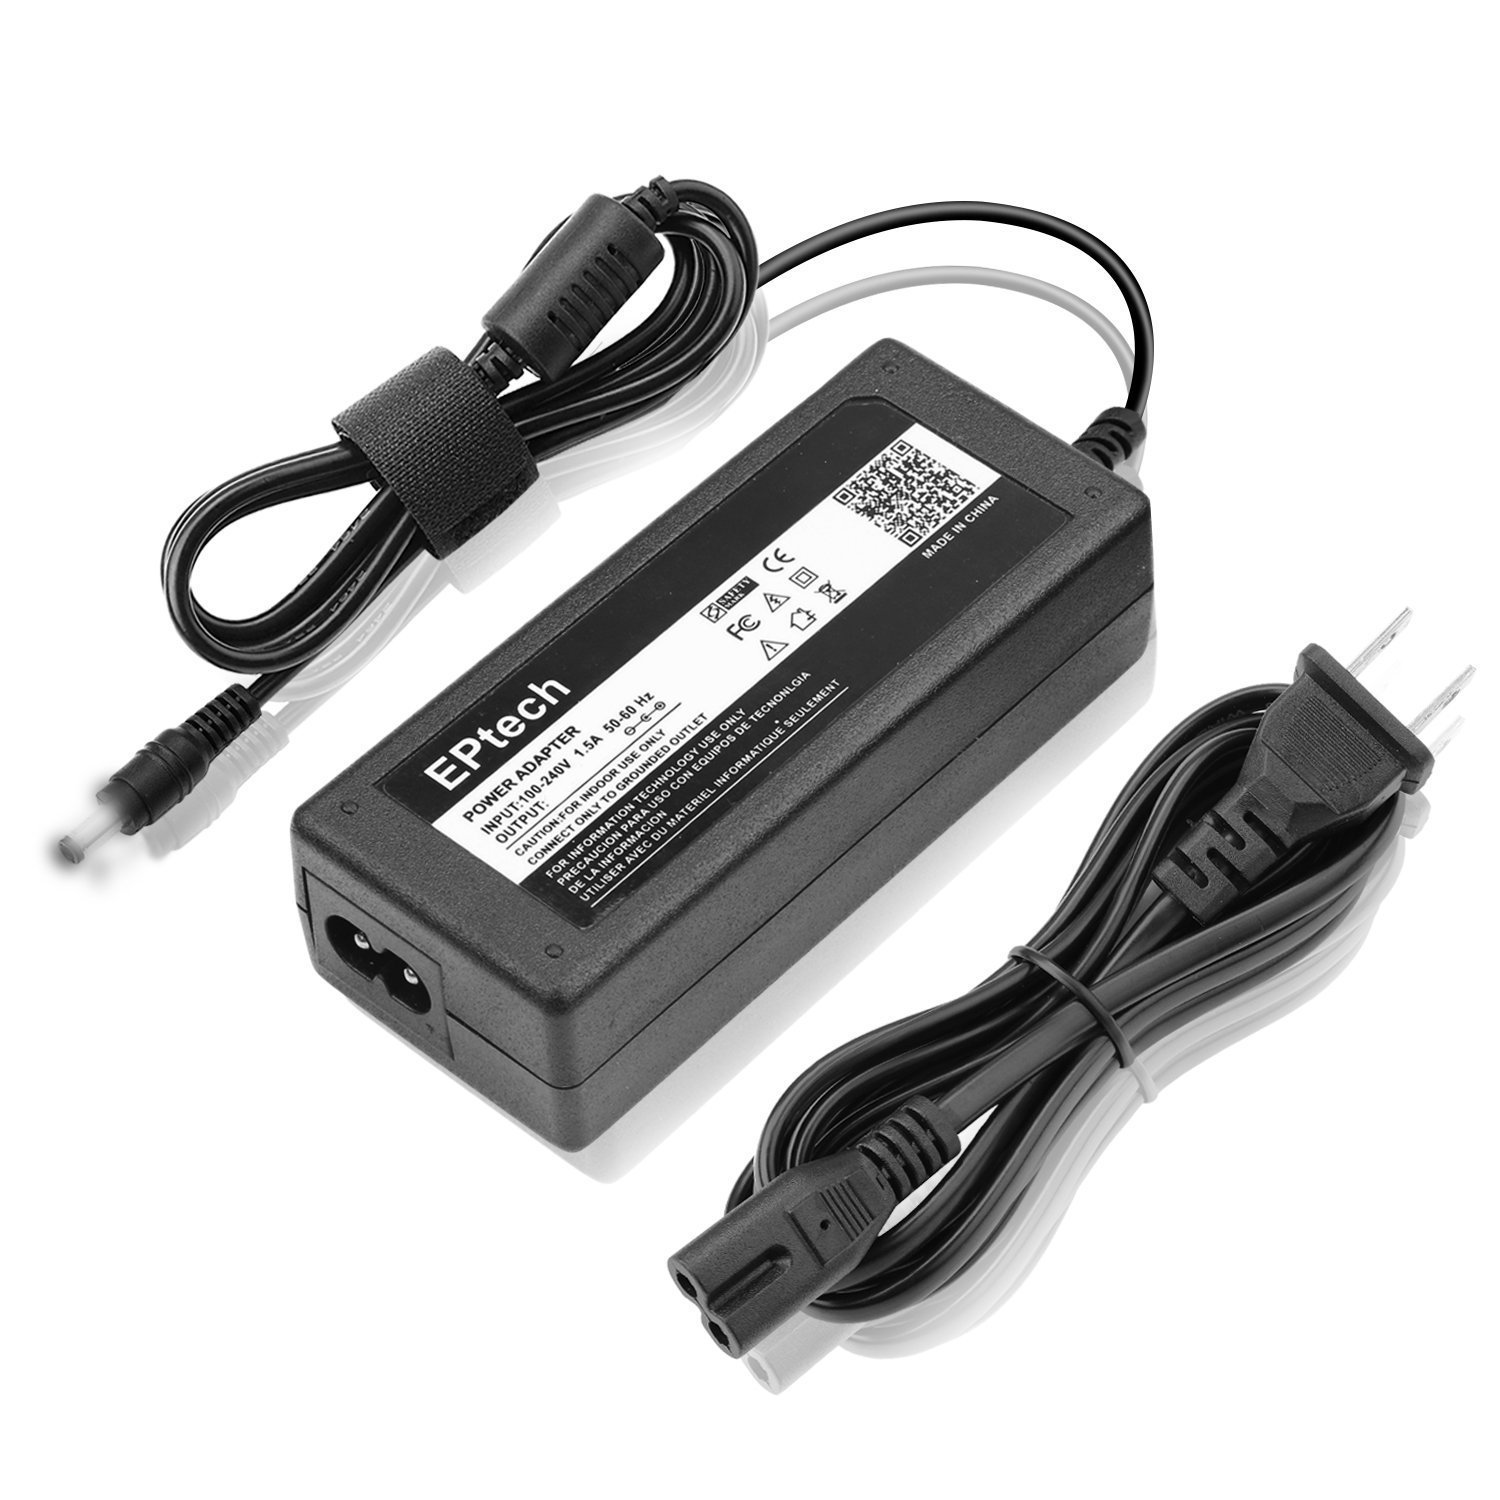 (10ft Long) Ac Dc Adapter For Fargo HDP5000 DTC1000 DTC1250e DTC4000 DTC4500 Lamination ID Card Thermal Printer Fargo DTC400 DTC550 Direct-to-Card 400E ID DTC550-LC ID Power Supply